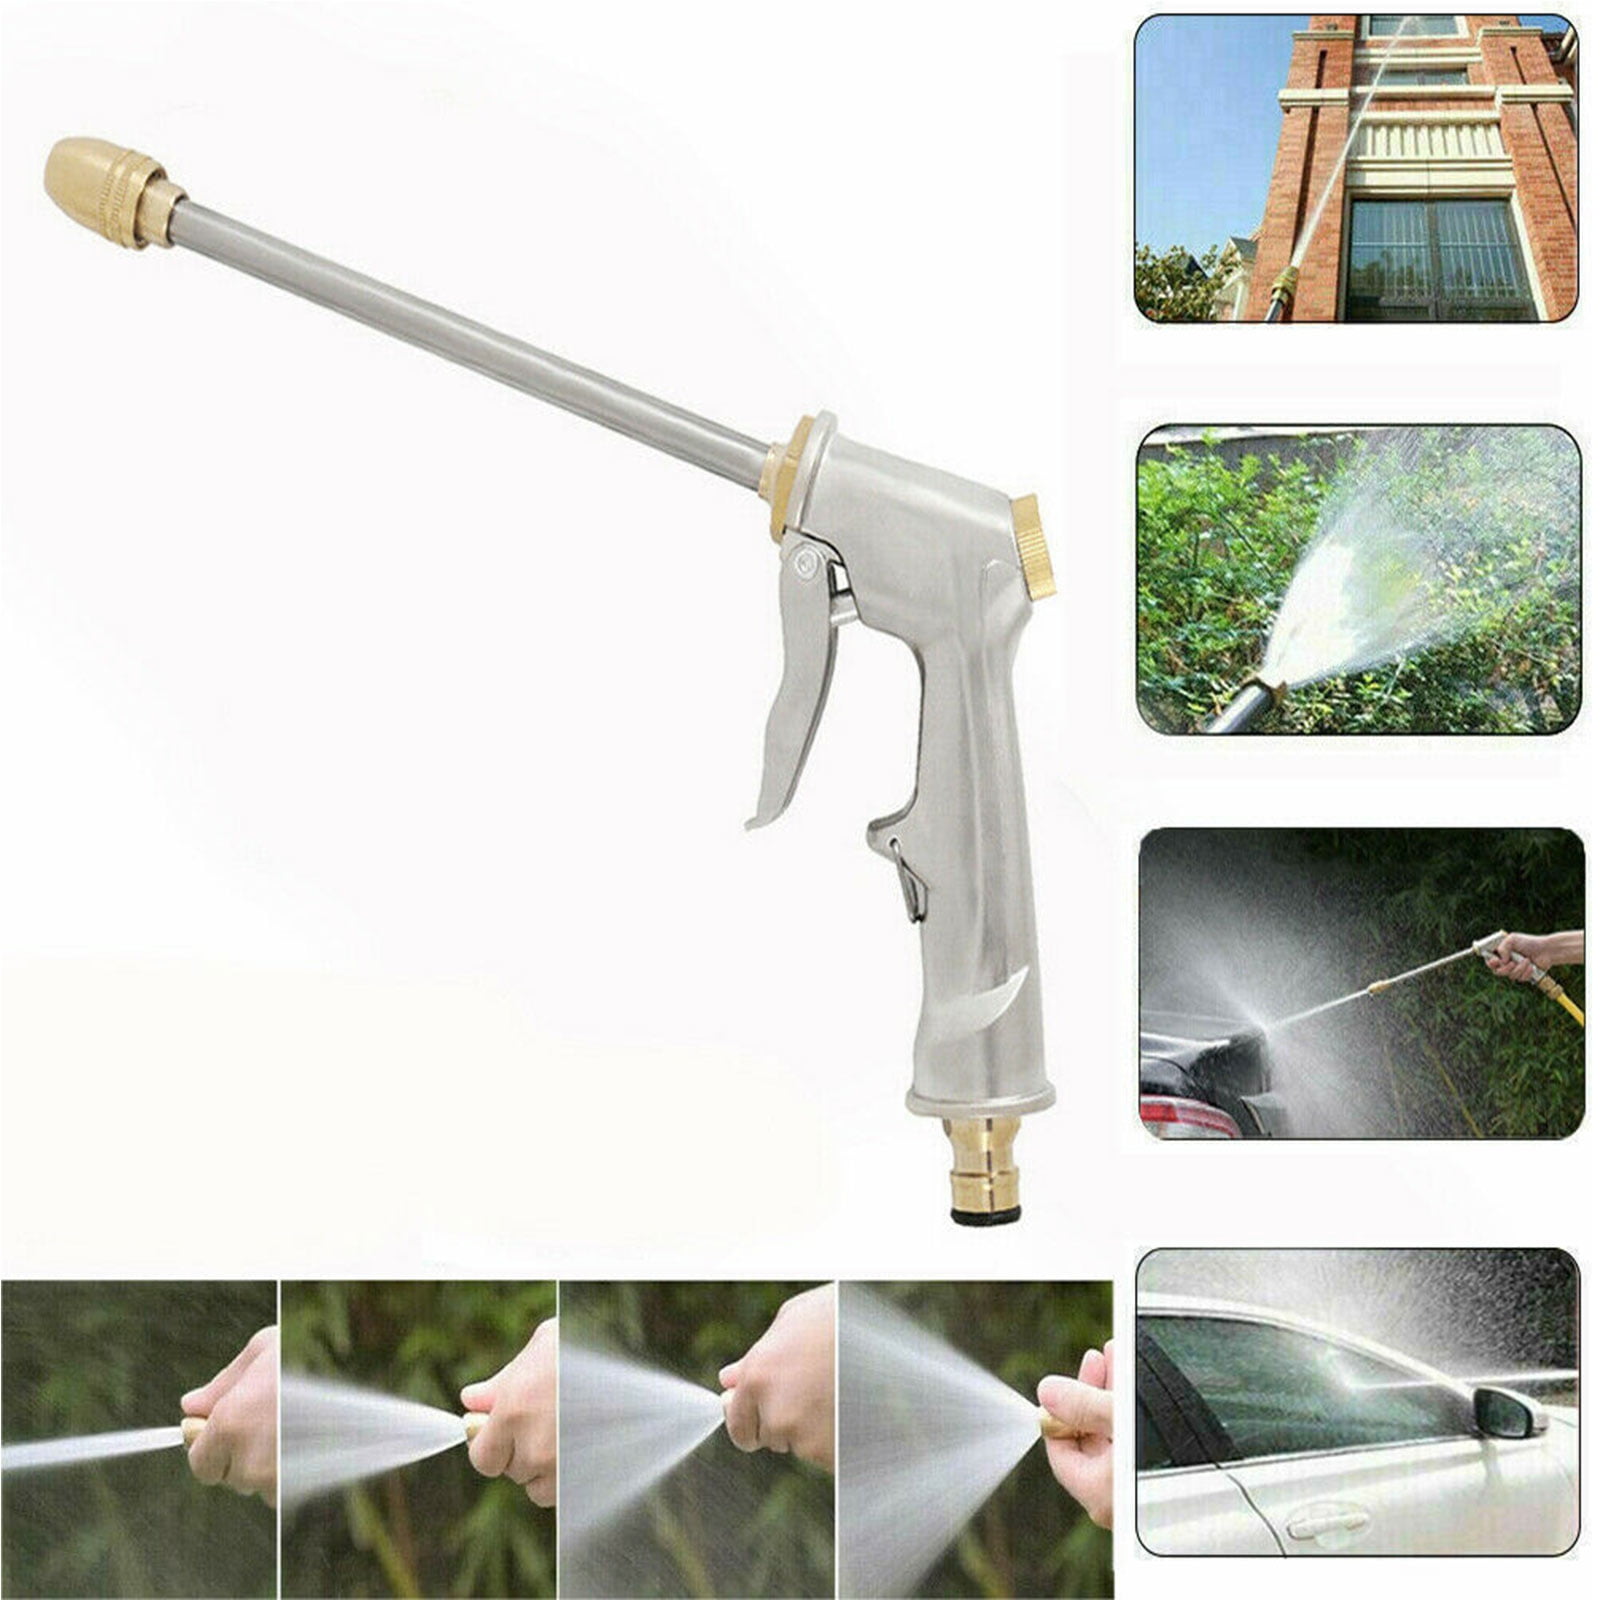 Portable High-Pressure Water Gun Spray Nozzle Garden Water Jet For Cleaning 